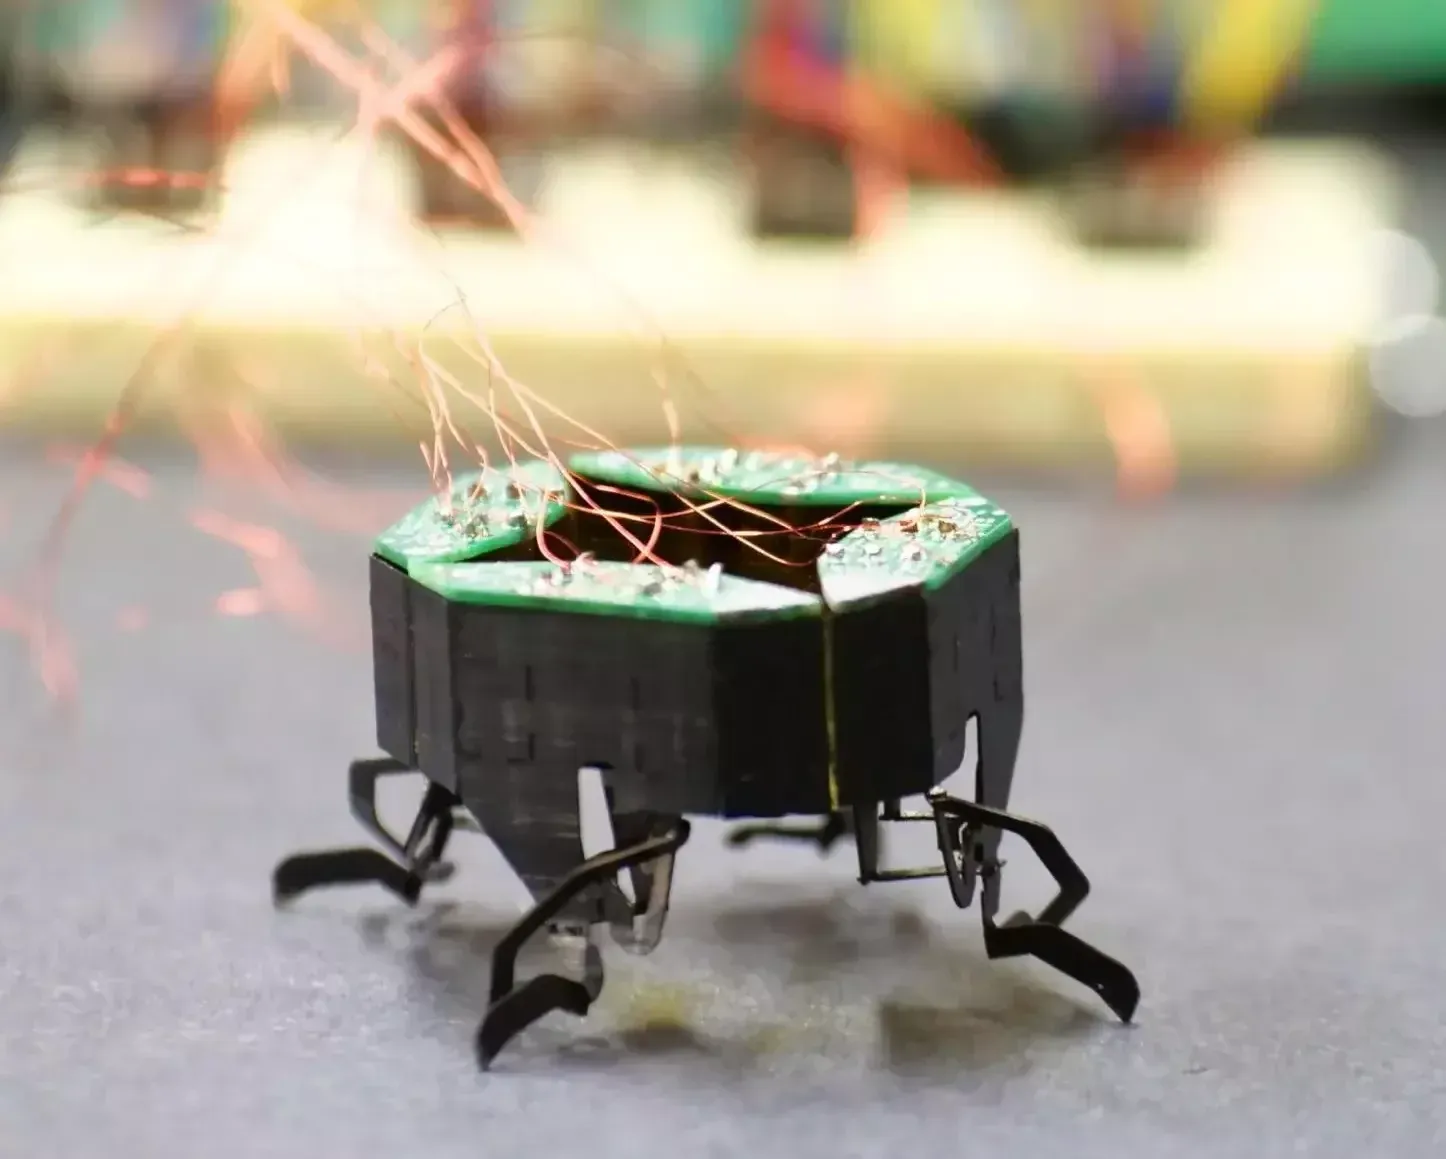 A close up photo of a tiny robot with six black legs and a circuit board on top, attached to a breadboard in the background through copper wires.